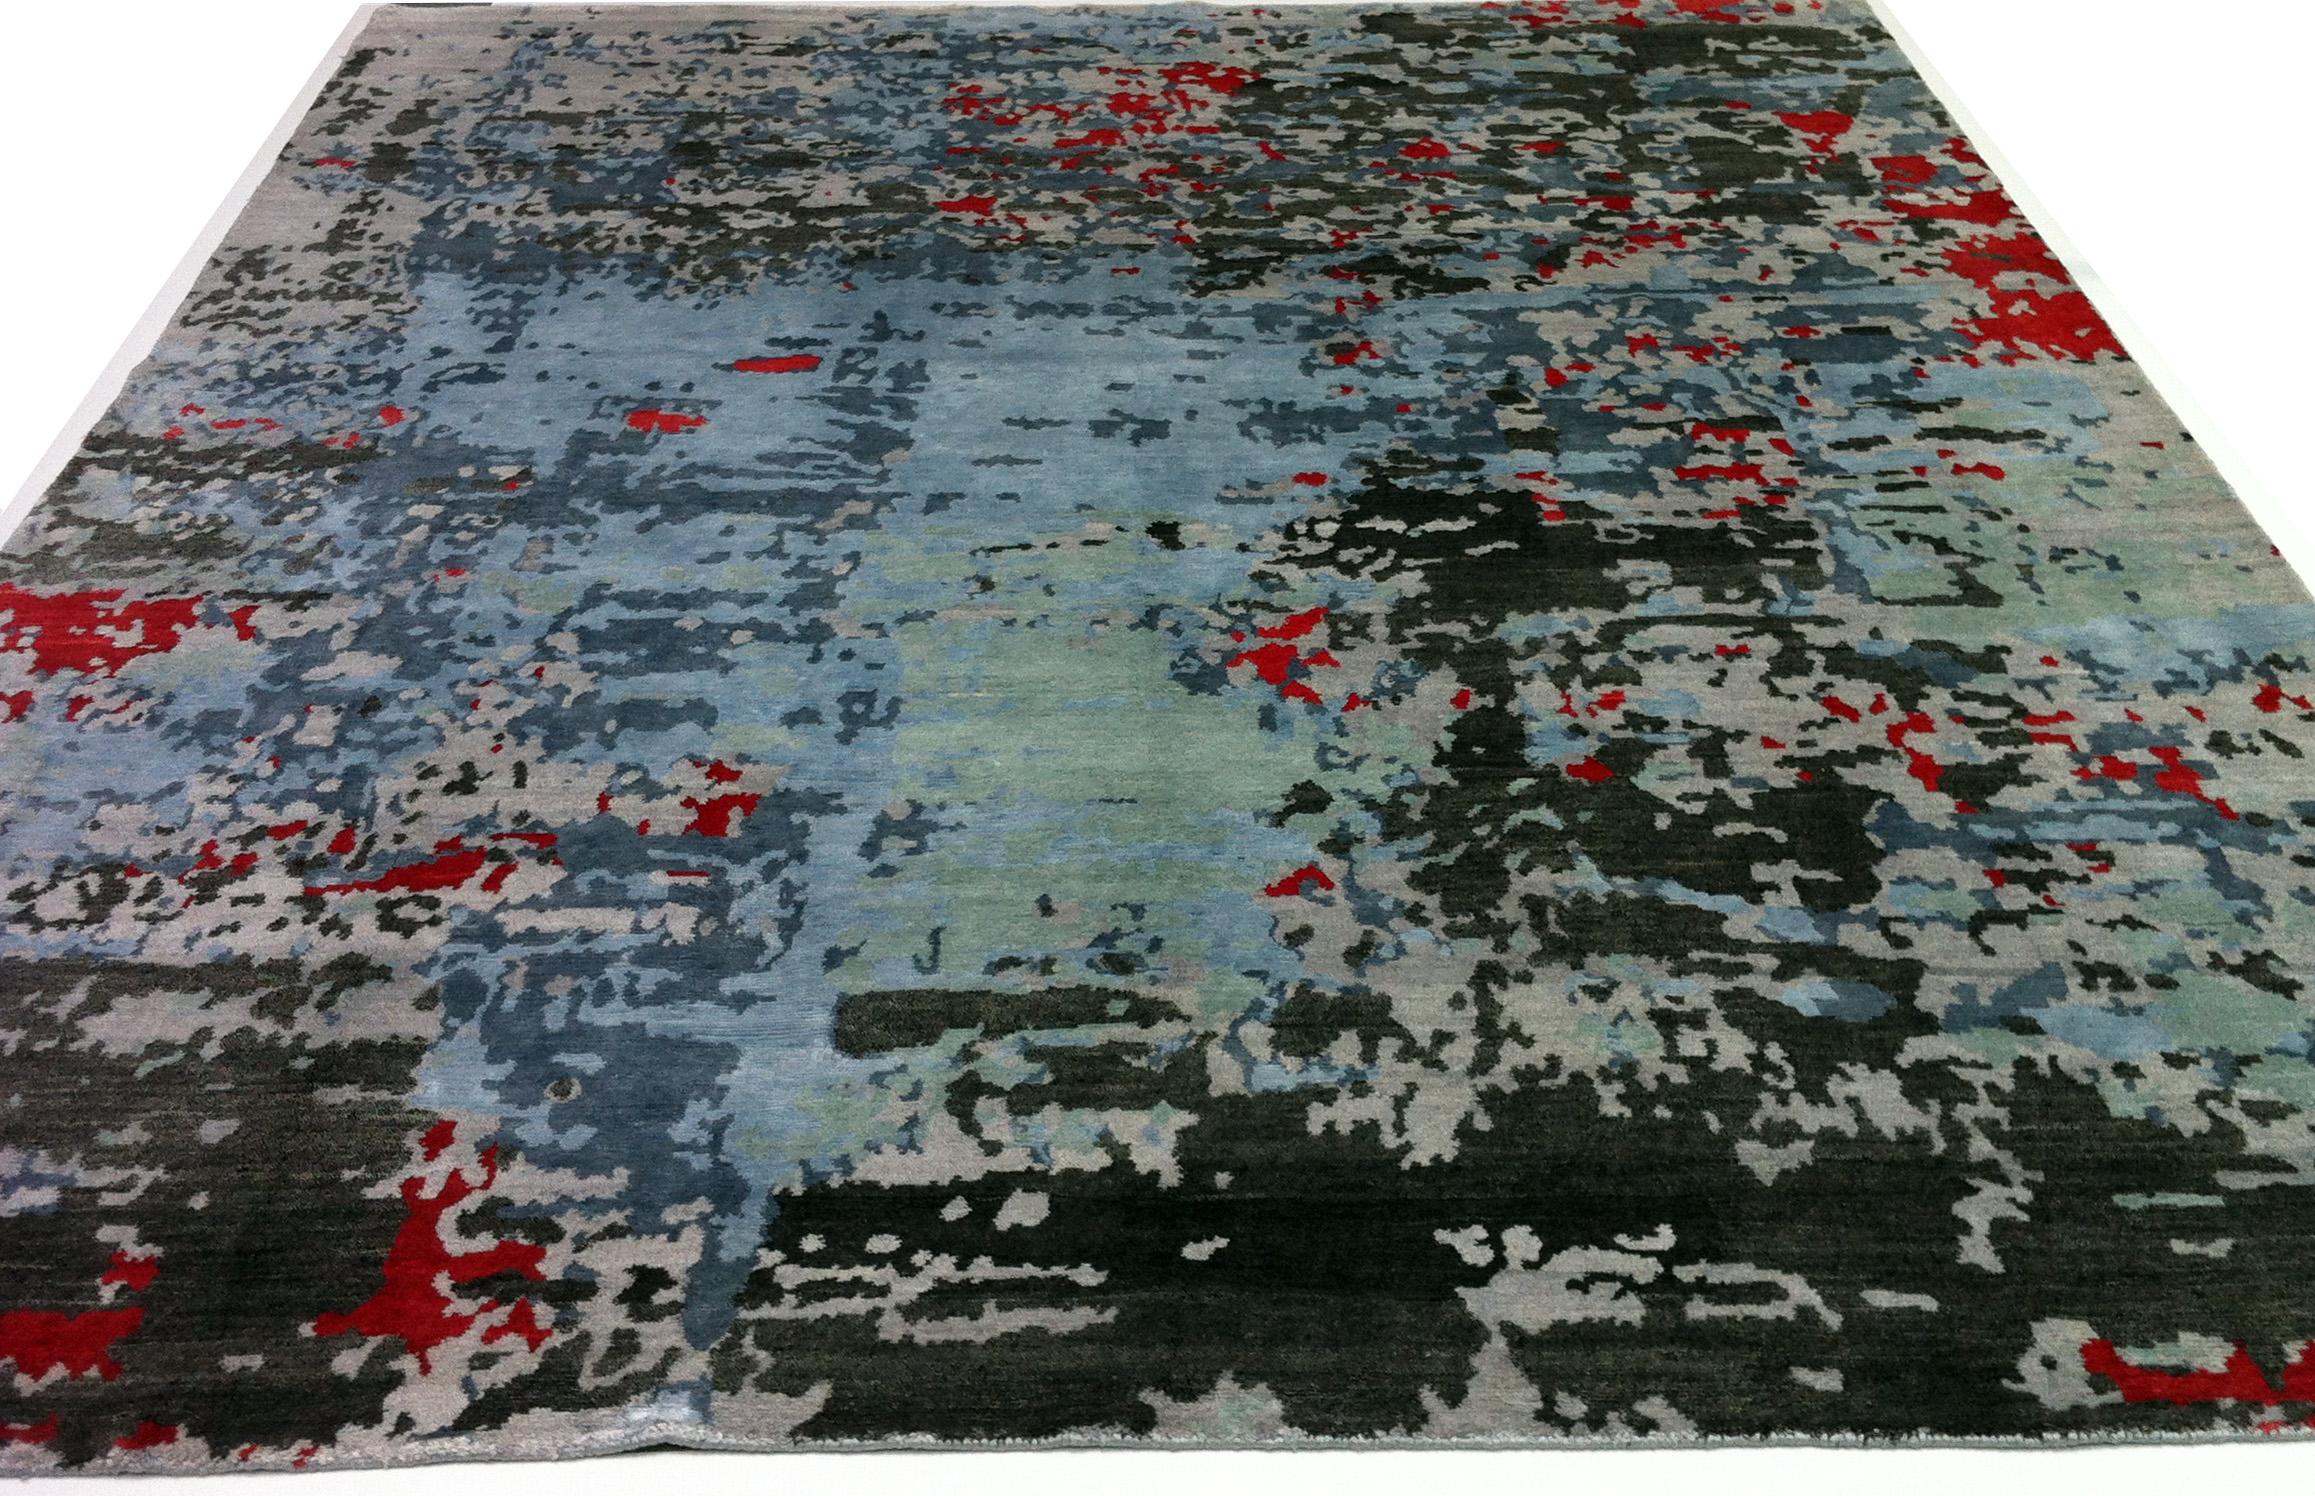 Modern colors meet modern design in this hand knotted Indian bamboo silk area rug. Splashes of red enliven the very contemporary light and dark black/grey/silver tones that blend seamlessly.